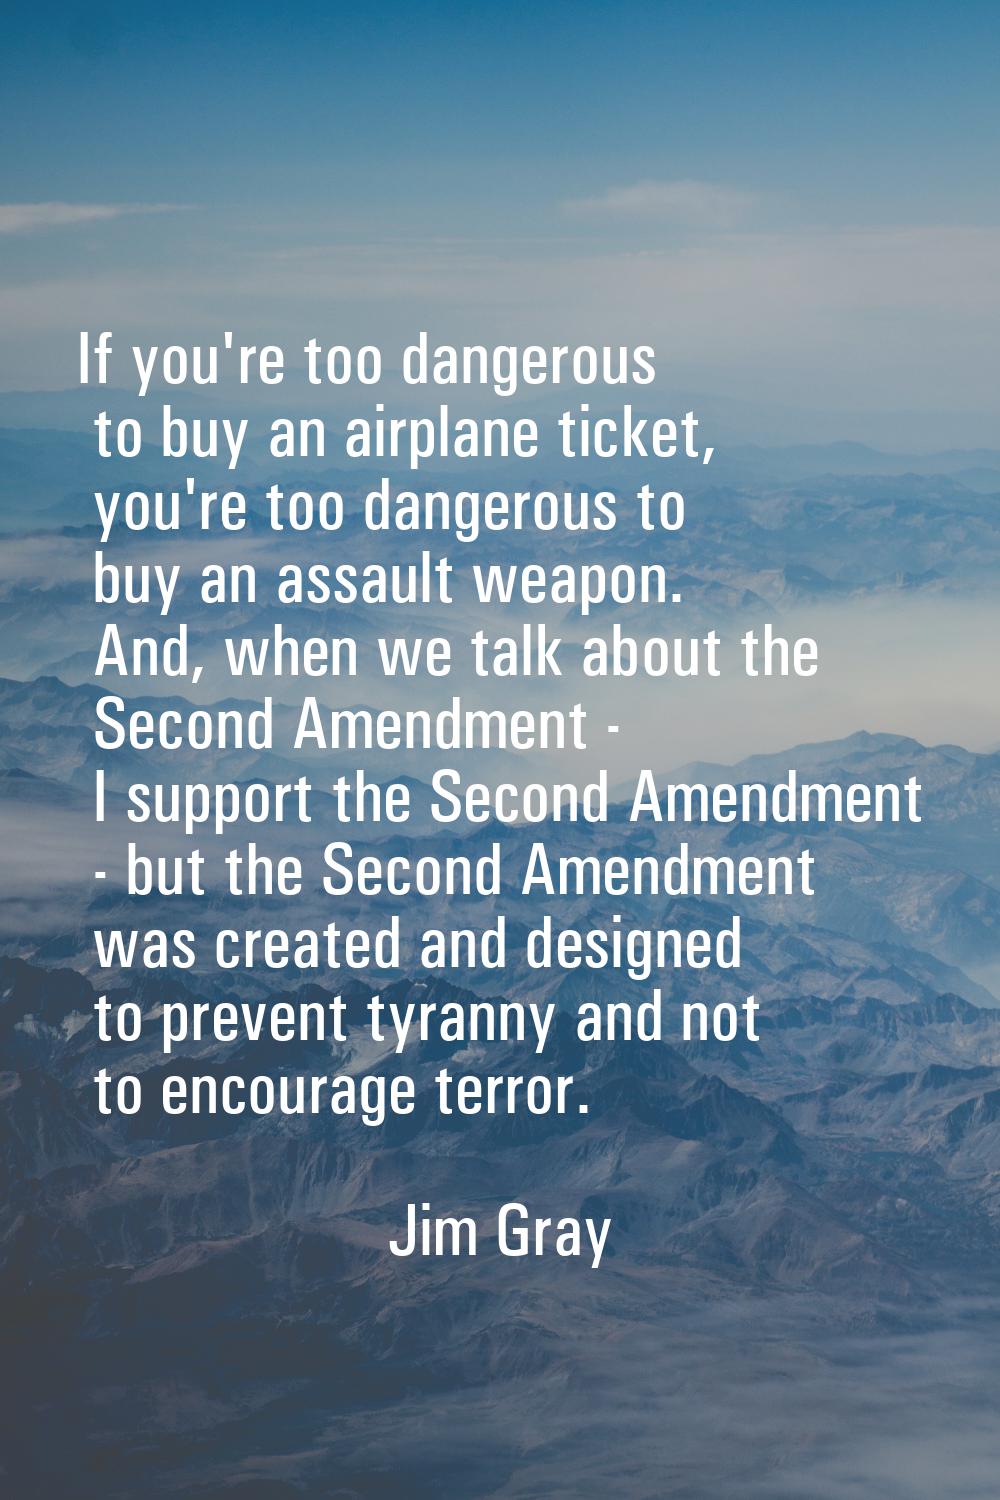 If you're too dangerous to buy an airplane ticket, you're too dangerous to buy an assault weapon. A